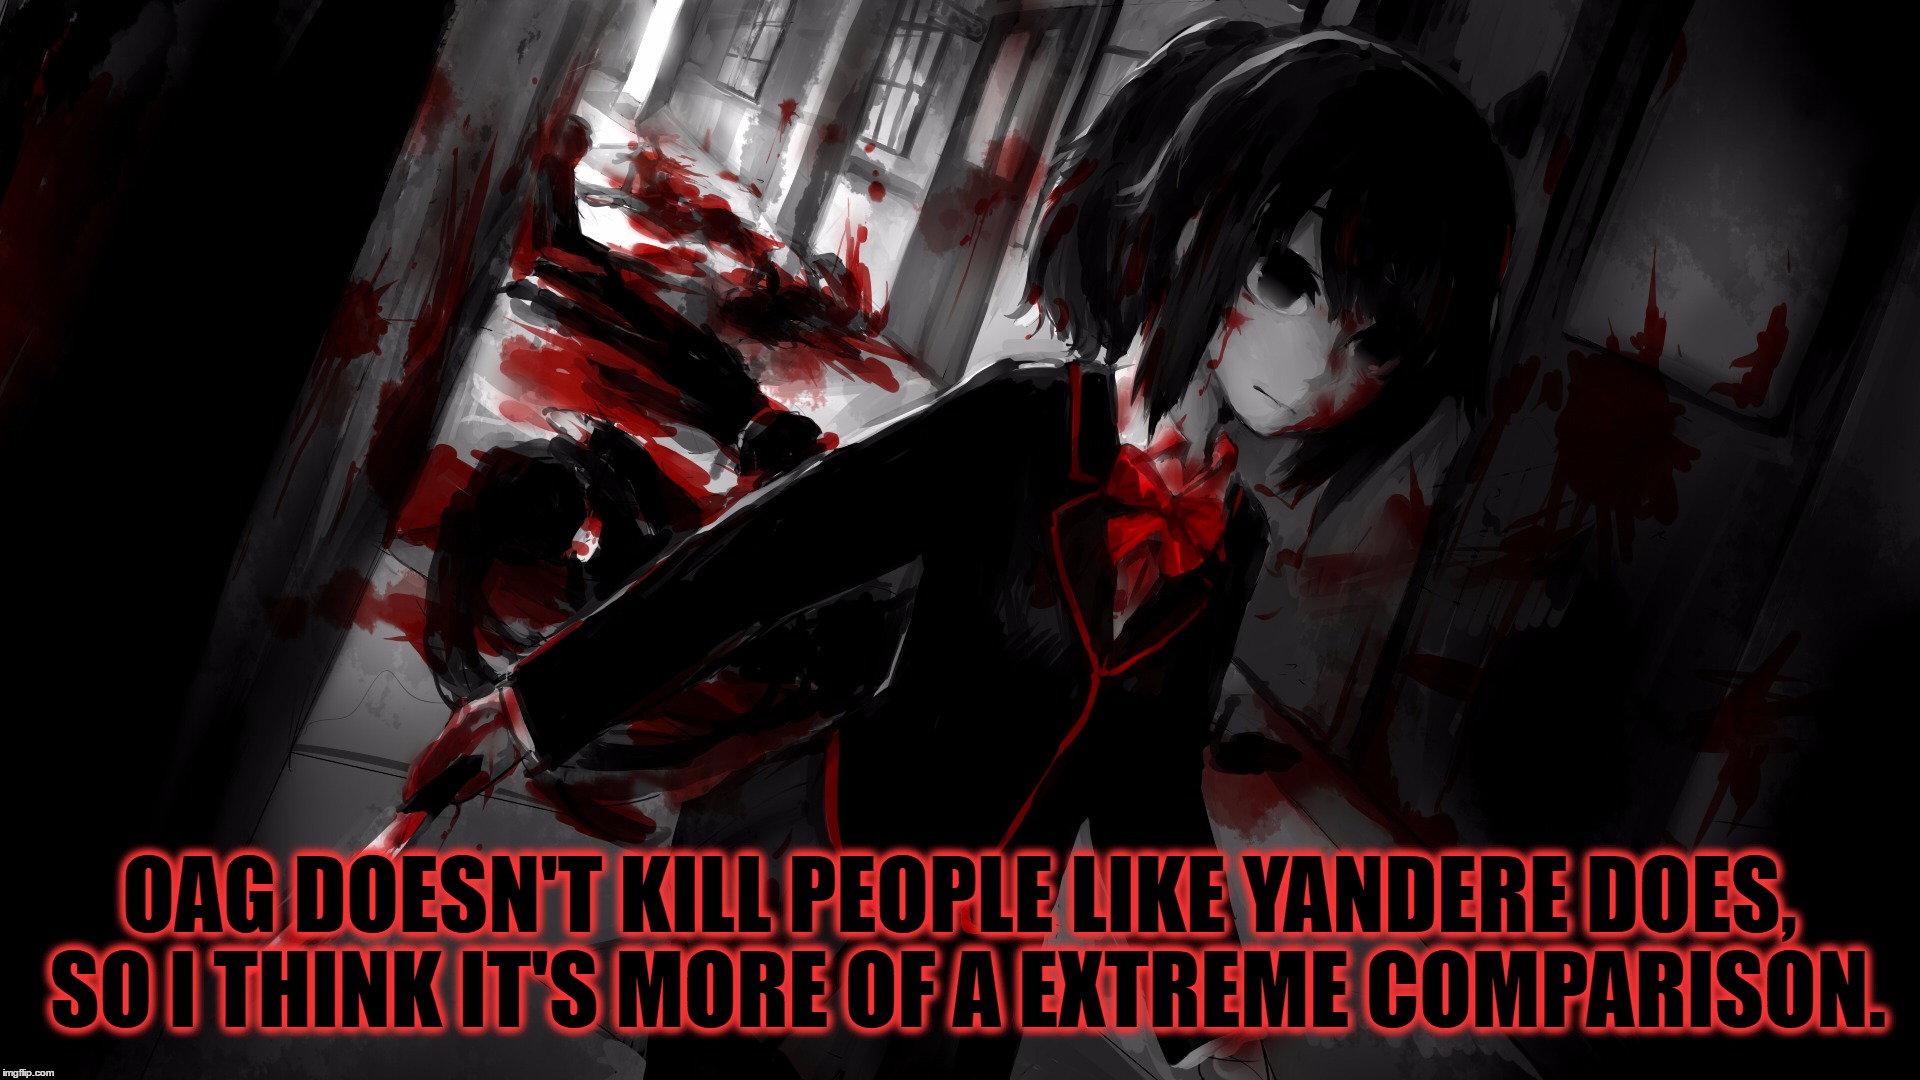 OAG DOESN'T KILL PEOPLE LIKE YANDERE DOES, SO I THINK IT'S MORE OF A EXTREME COMPARISON. | made w/ Imgflip meme maker